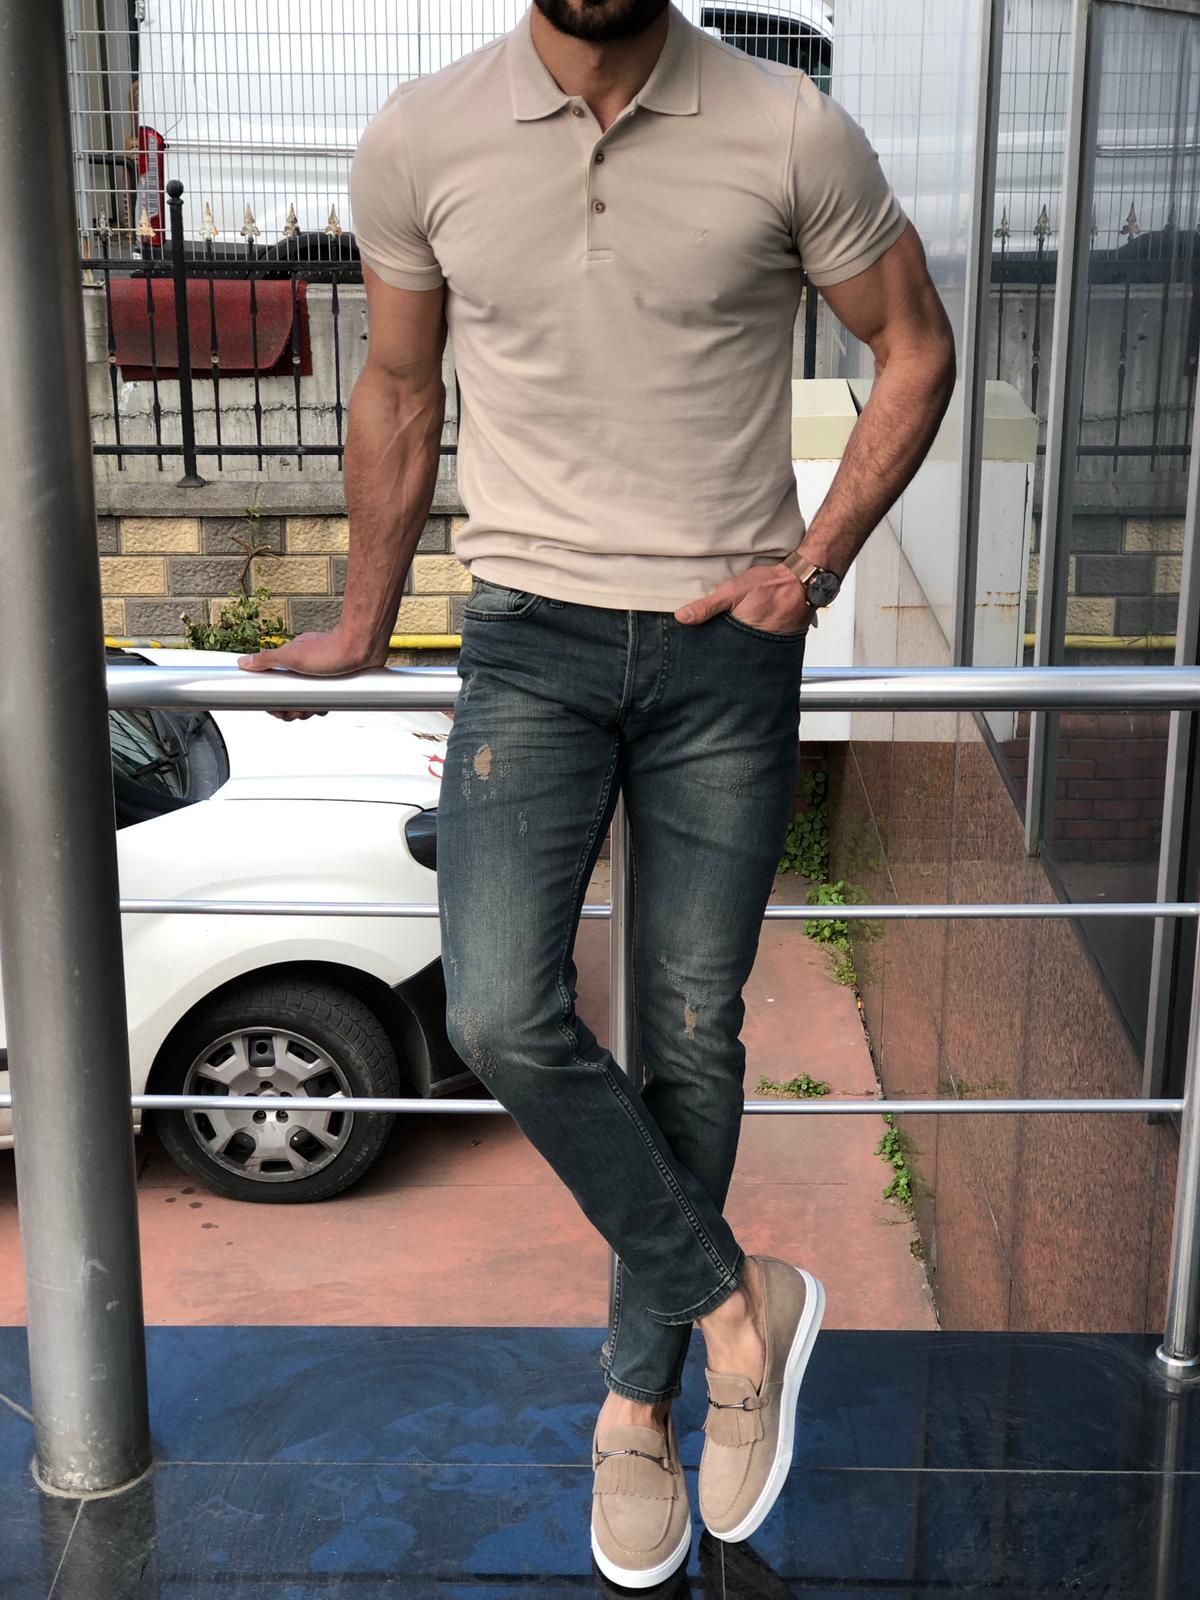 17 fitness Men outfits ideas